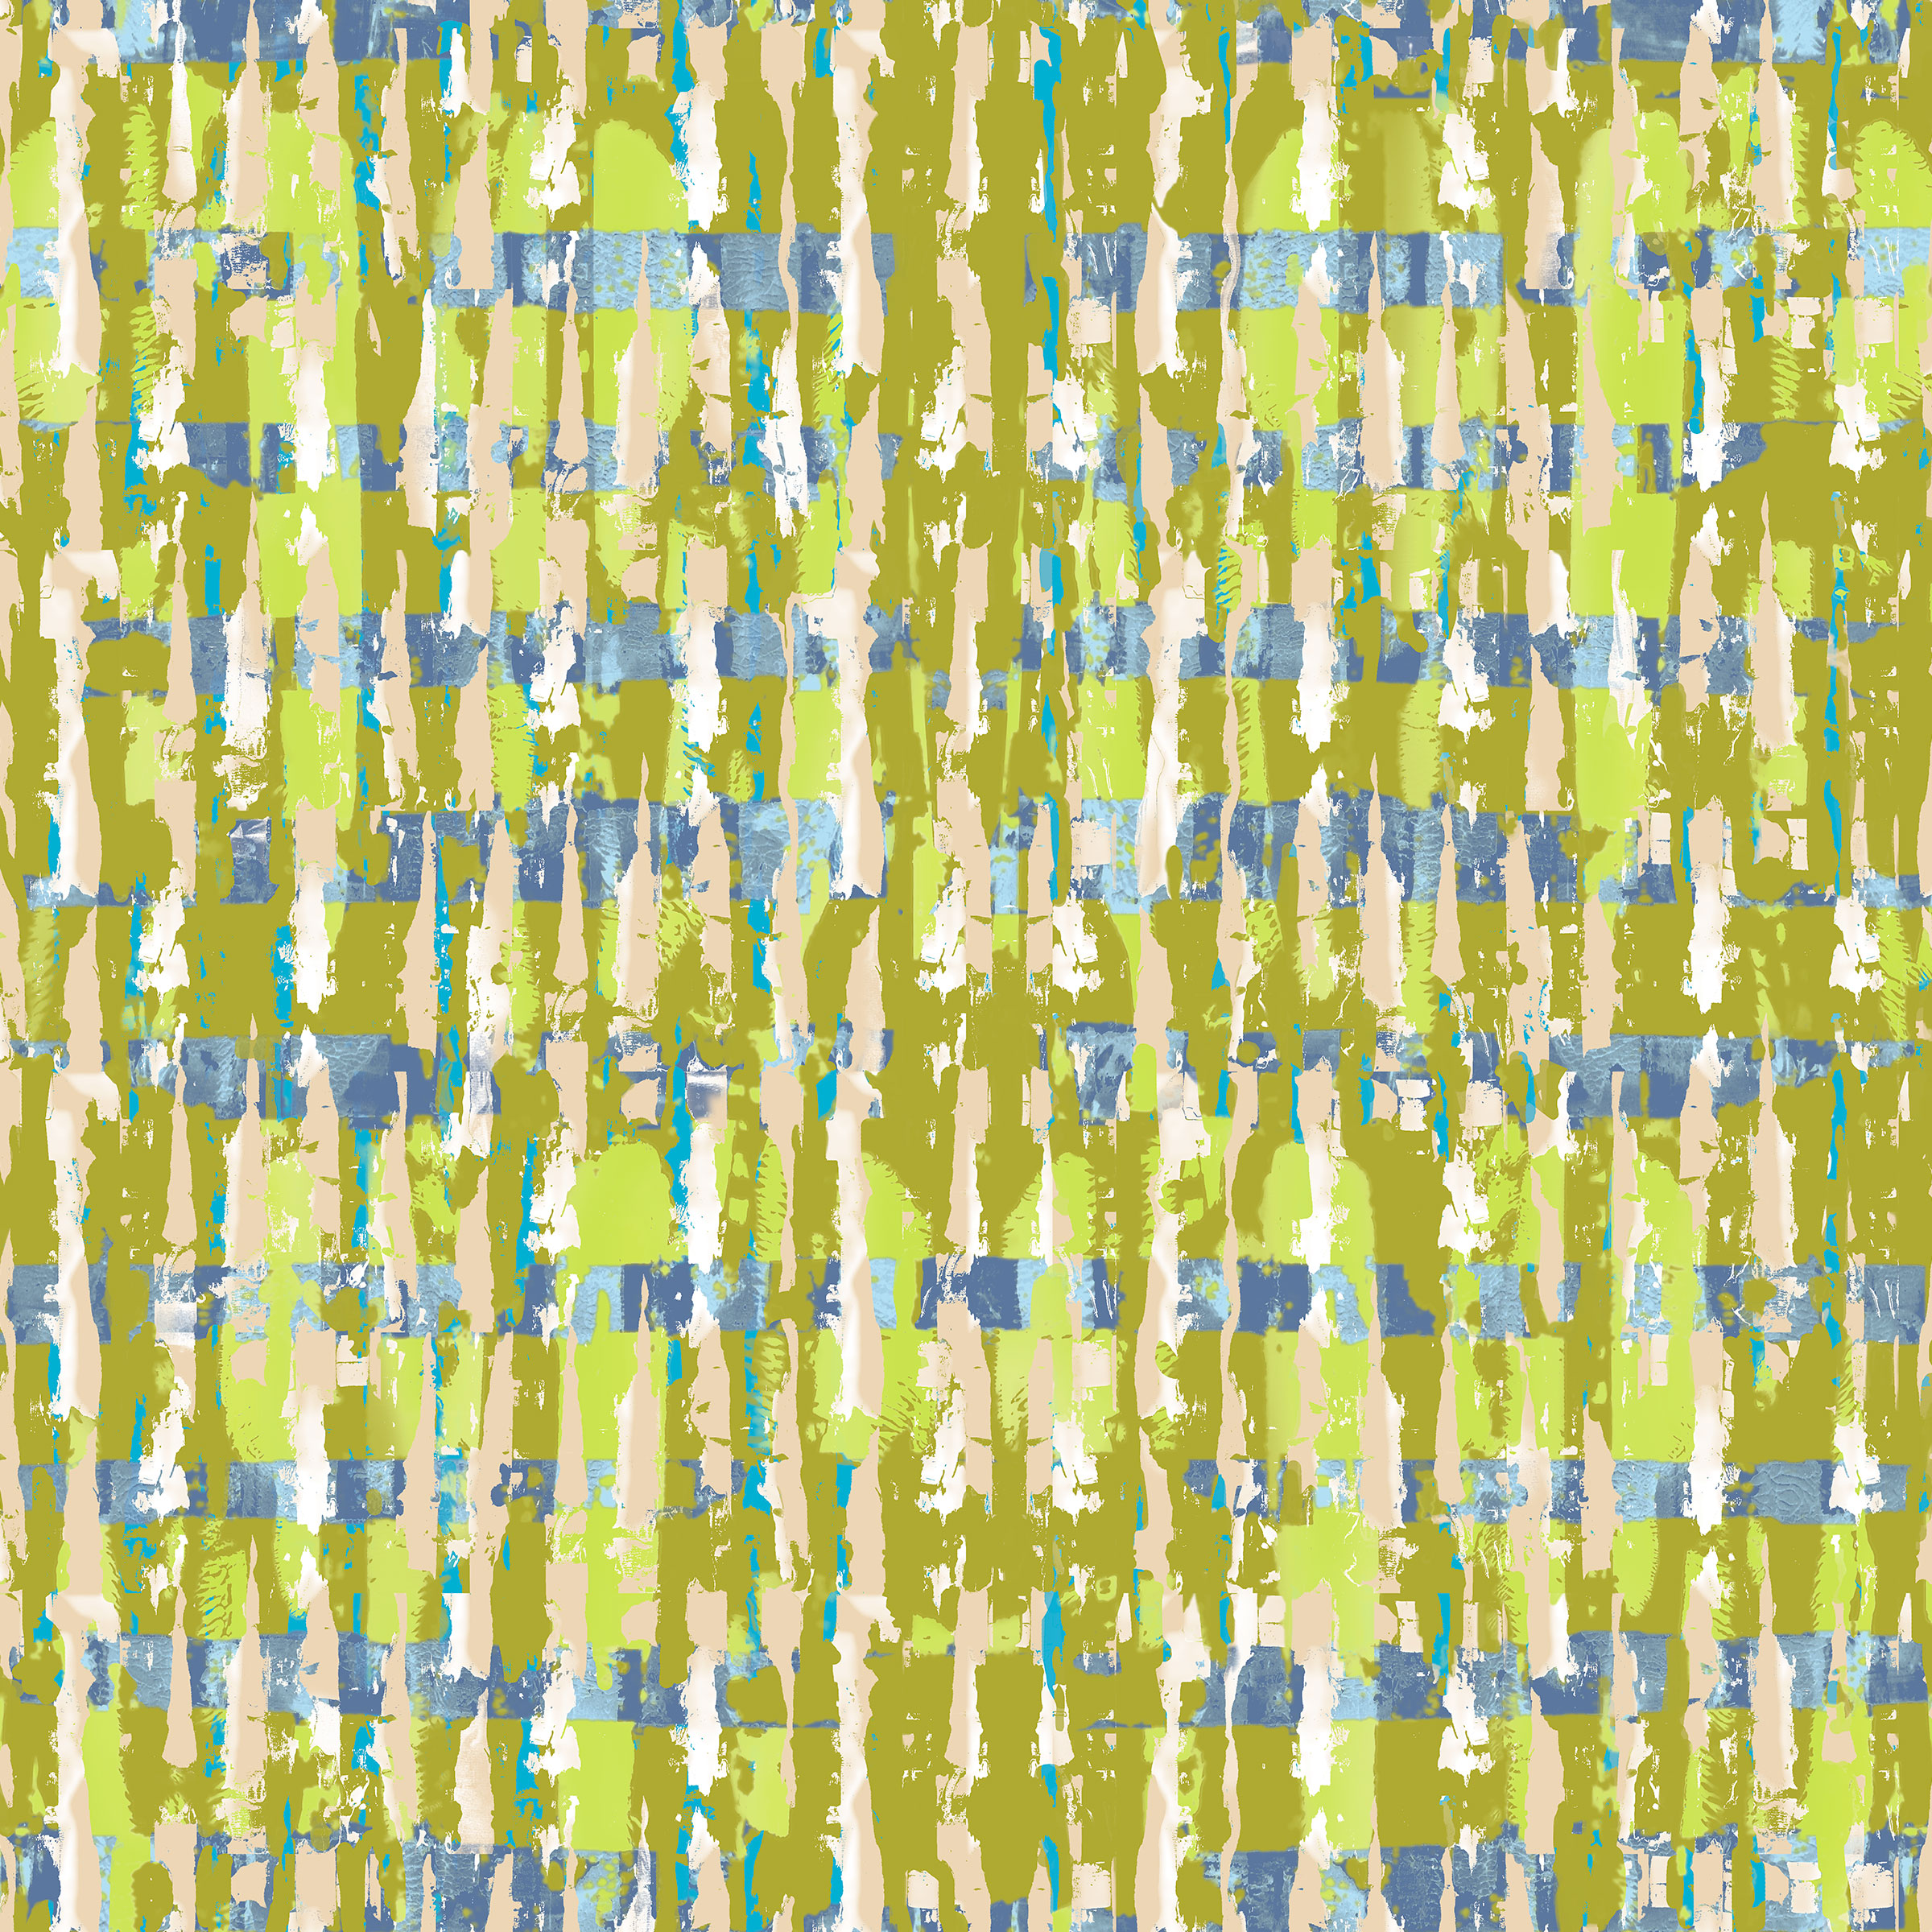 Poster. Textile design for upholstery and wall panels. Green colourway.